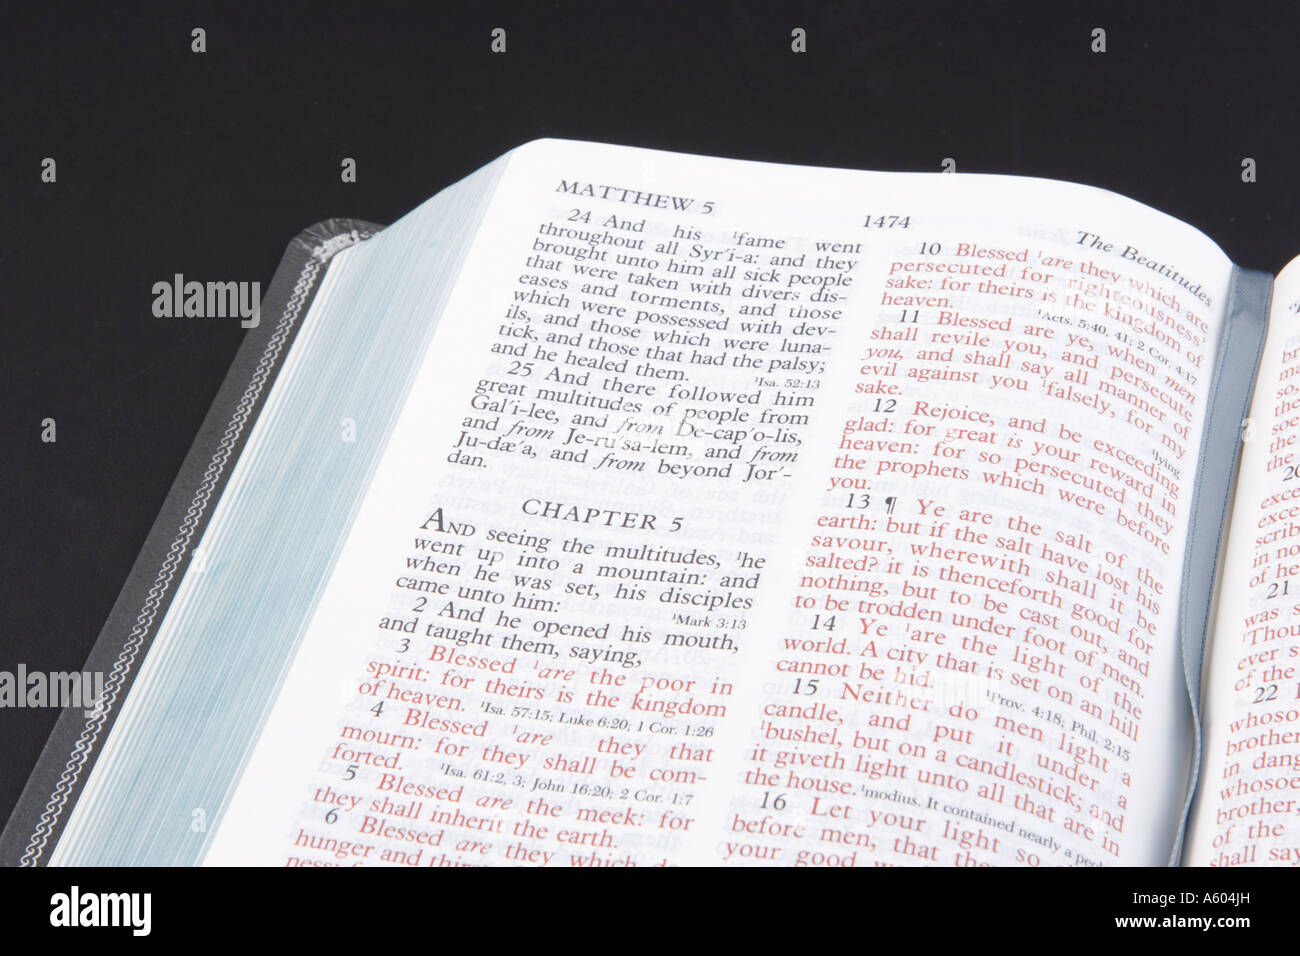 Open Holy Bible showing both black and red lettered text on black horizontal background Stock Photo